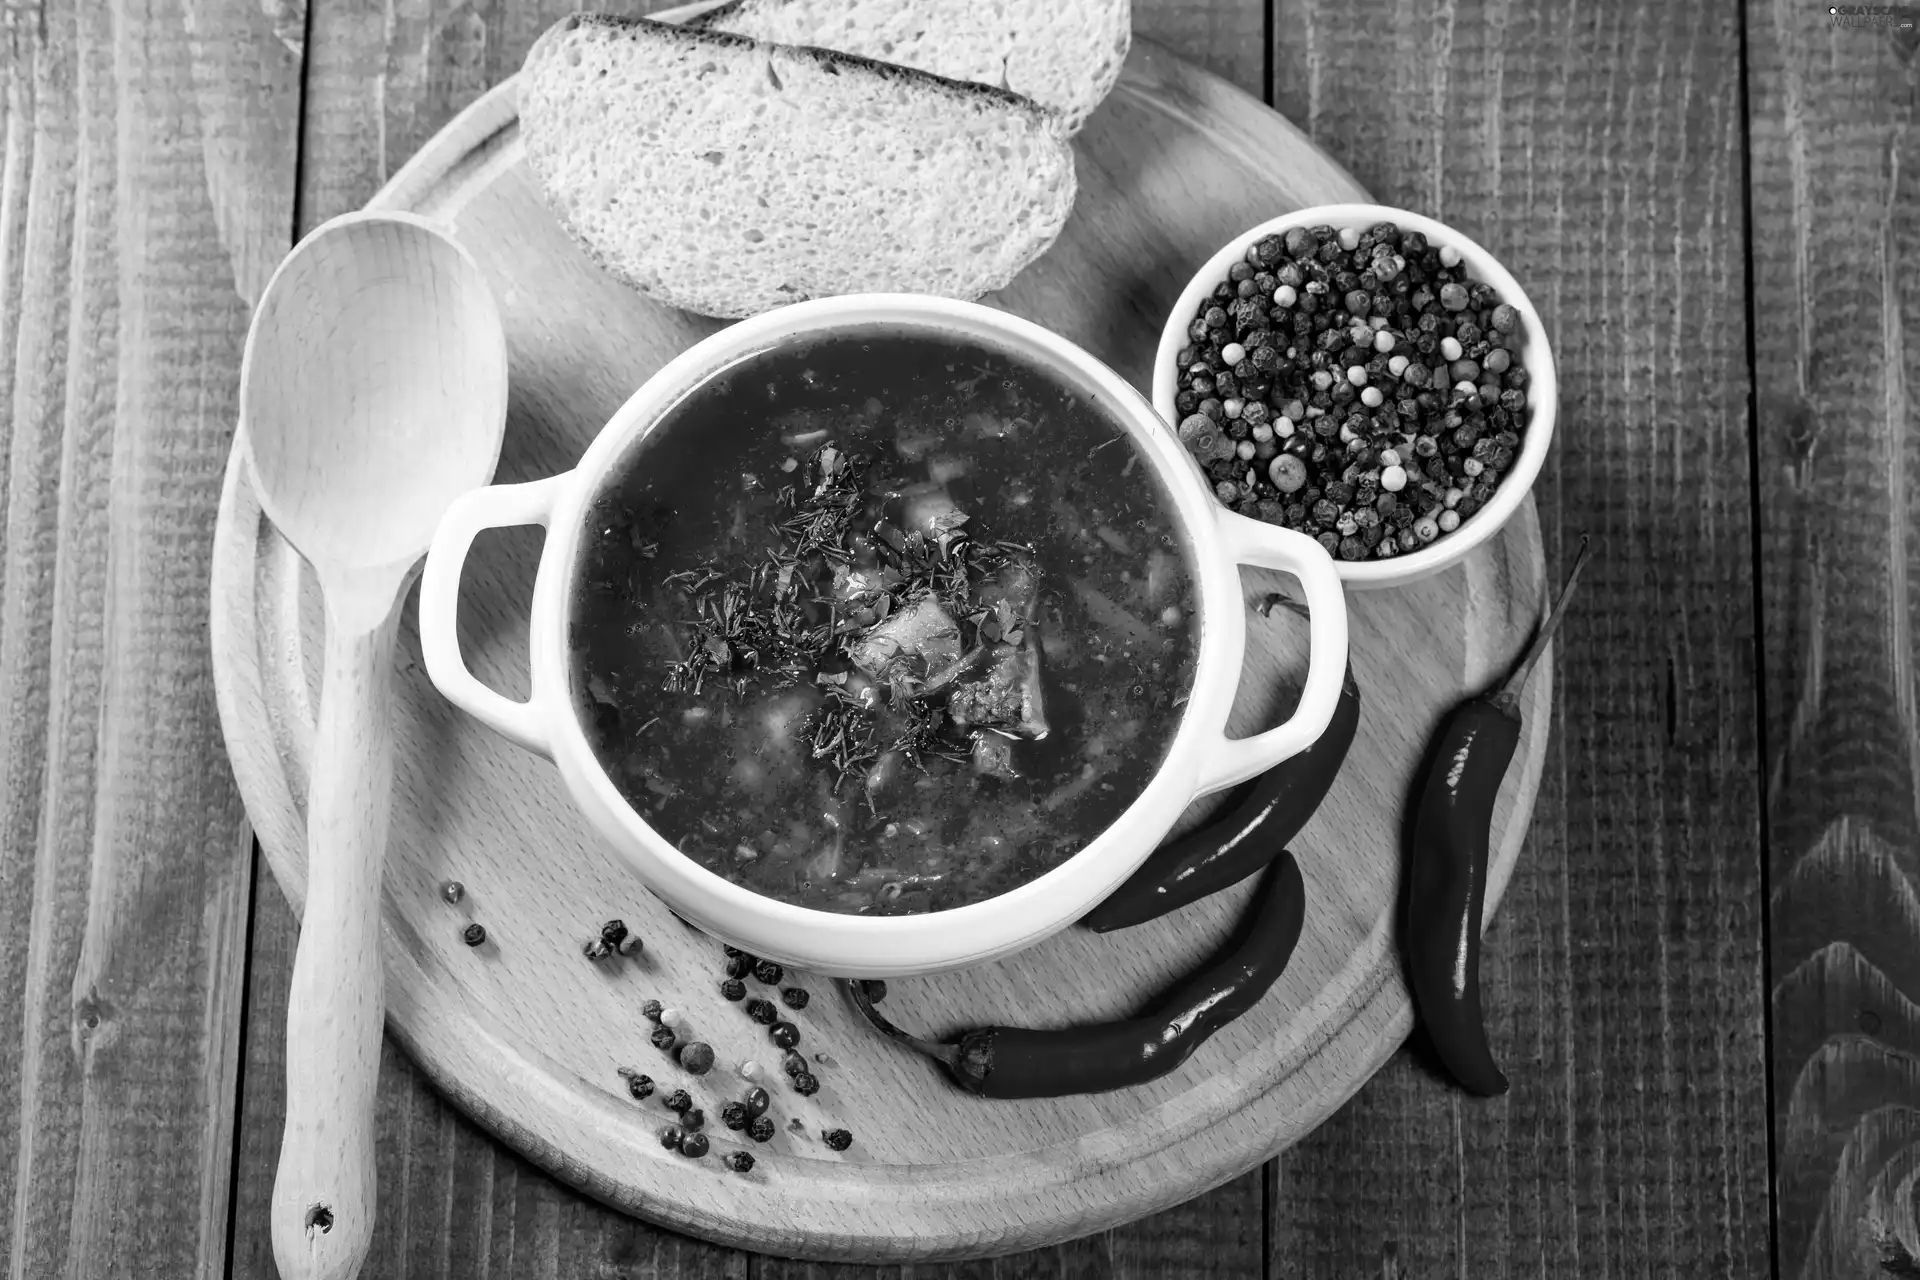 Chili, soup, color, pepper, slices, Wooden, bucket, Chilies, bowl, board, bread